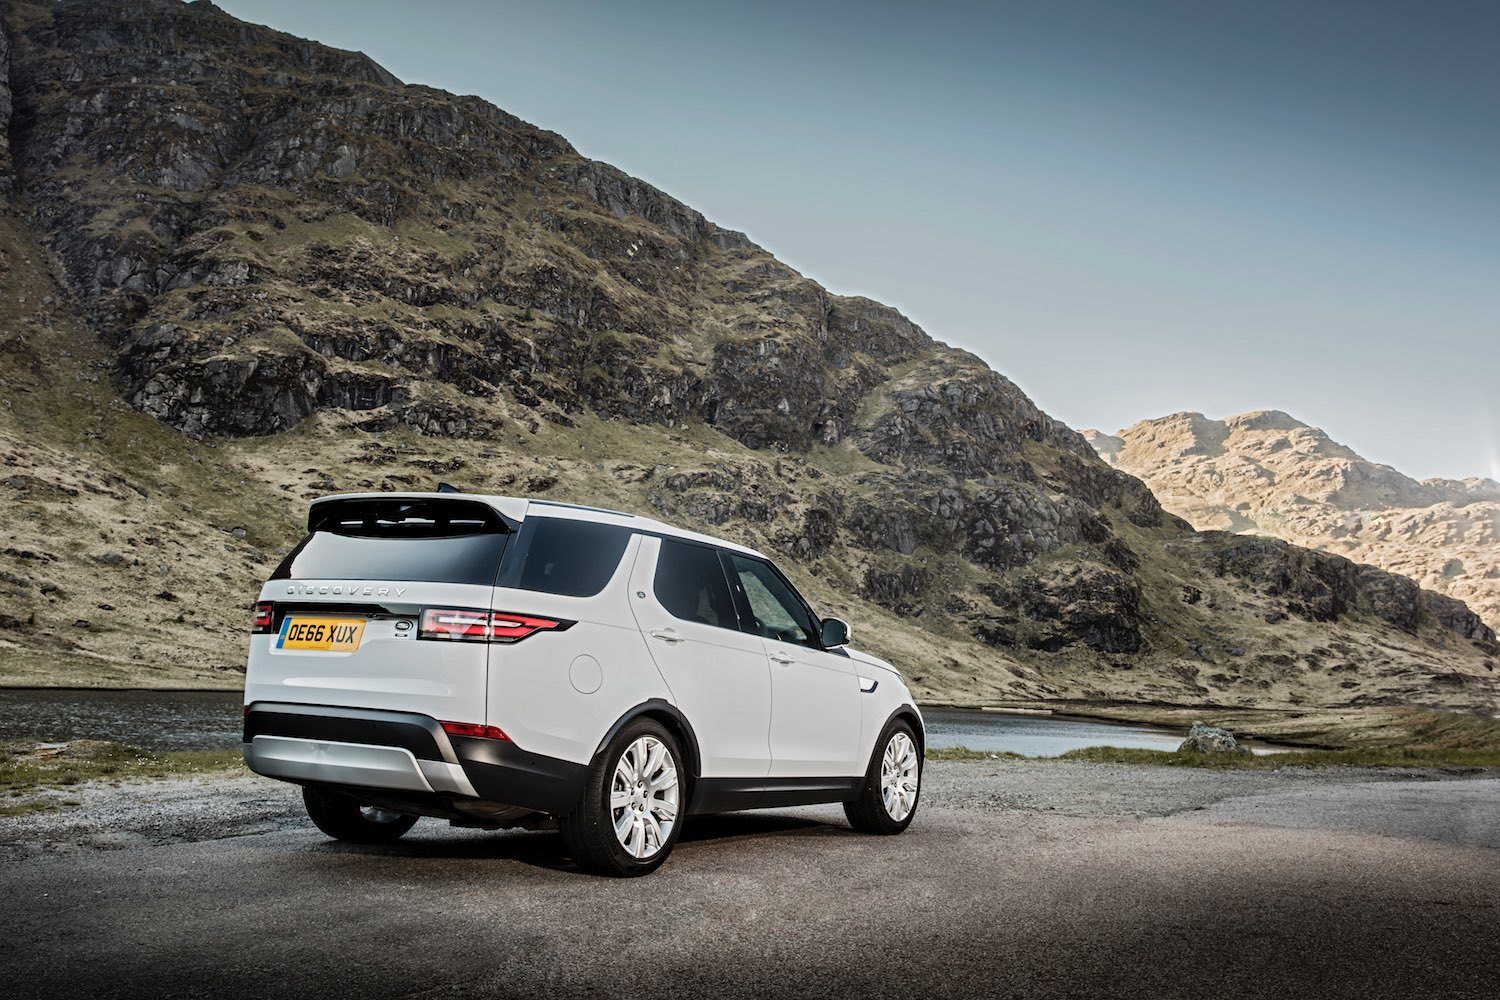 Neil Lyndon reviews the All New Land Rover Discovery in Scotland 12